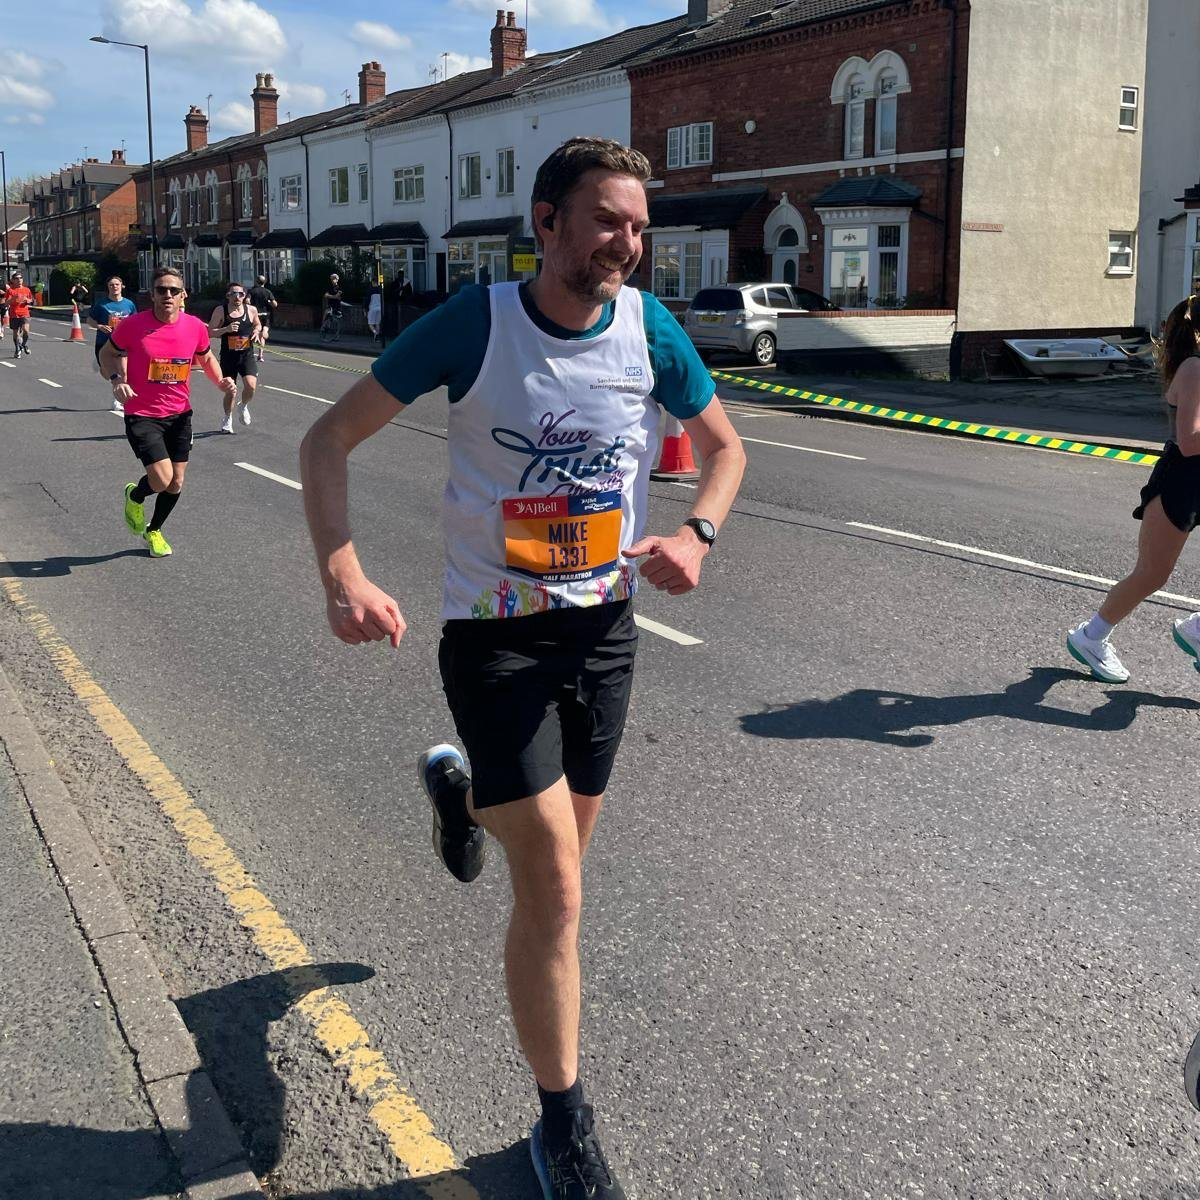 Well done to the Trust's Dr Mike Blaber and teachers Jamie, Quinn & Luke from @BHallAcademy who raised over £1k for @SWBHCharity after taking part in this year’s Great Birmingham Run Half Marathon. You can still donate by going to: swbh.nhs.uk/news/doctor-jo…